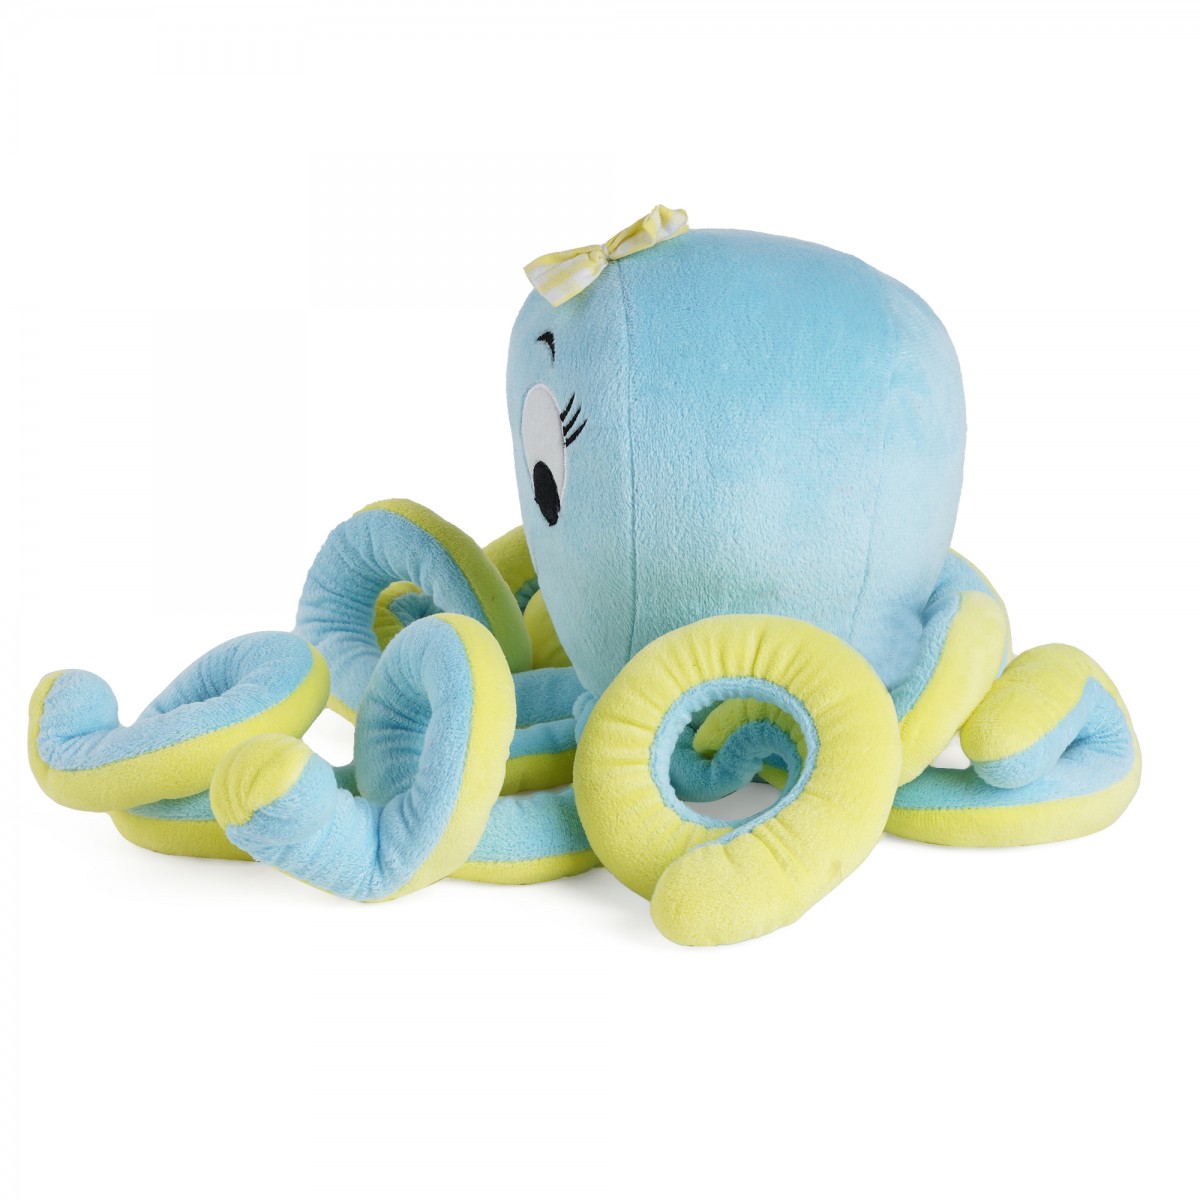 Huggable Cuddly Octopus Stuffed Toy By Fuzzbuzz, Soft Toys for Kids, Cute Plushies Blue, For Kids Of Age 2 Years & Above